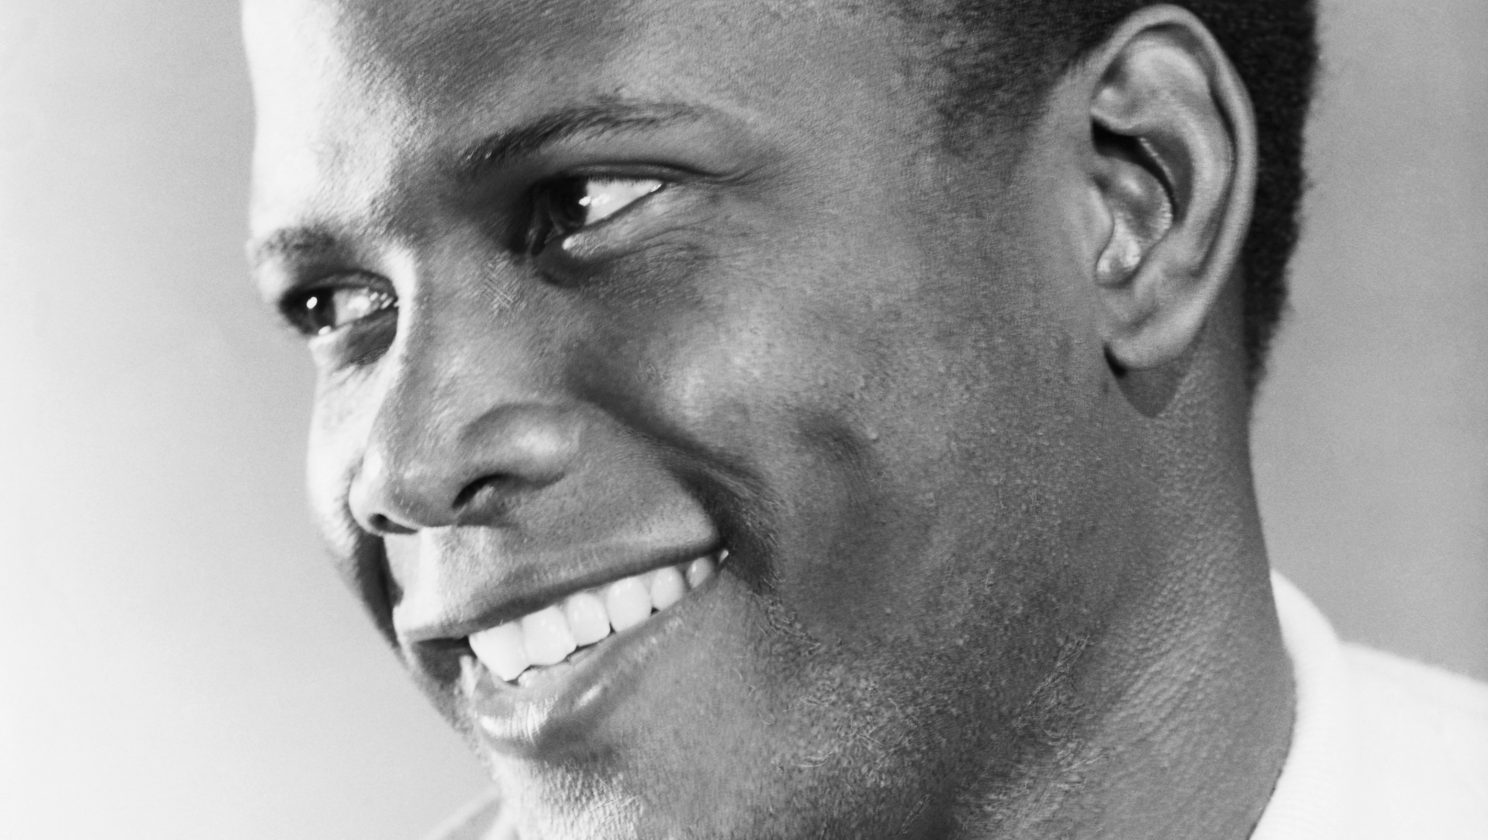 Sidney Poitier, the first Black actor to win the Academy Award for Best Actor